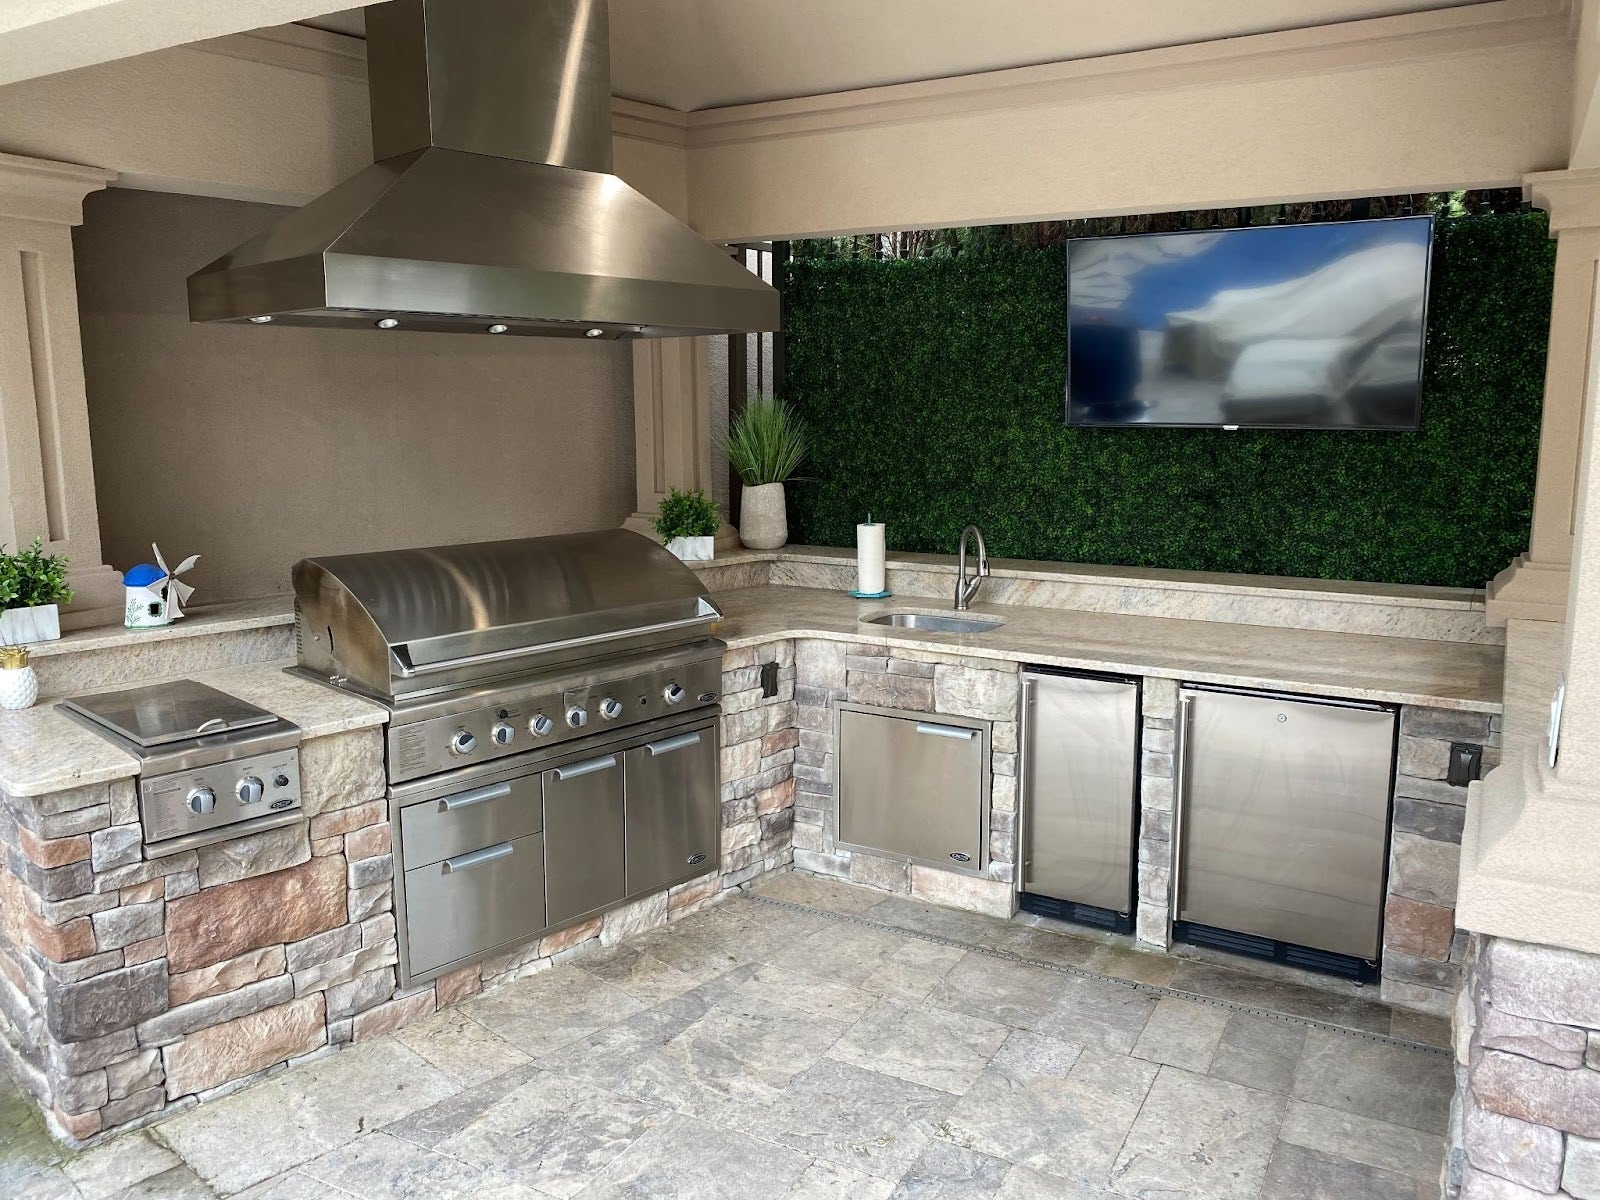 Sleek outdoor cooking area featuring stone worktops, stainless steel appliances, and a mounted television against a lush green backdrop.